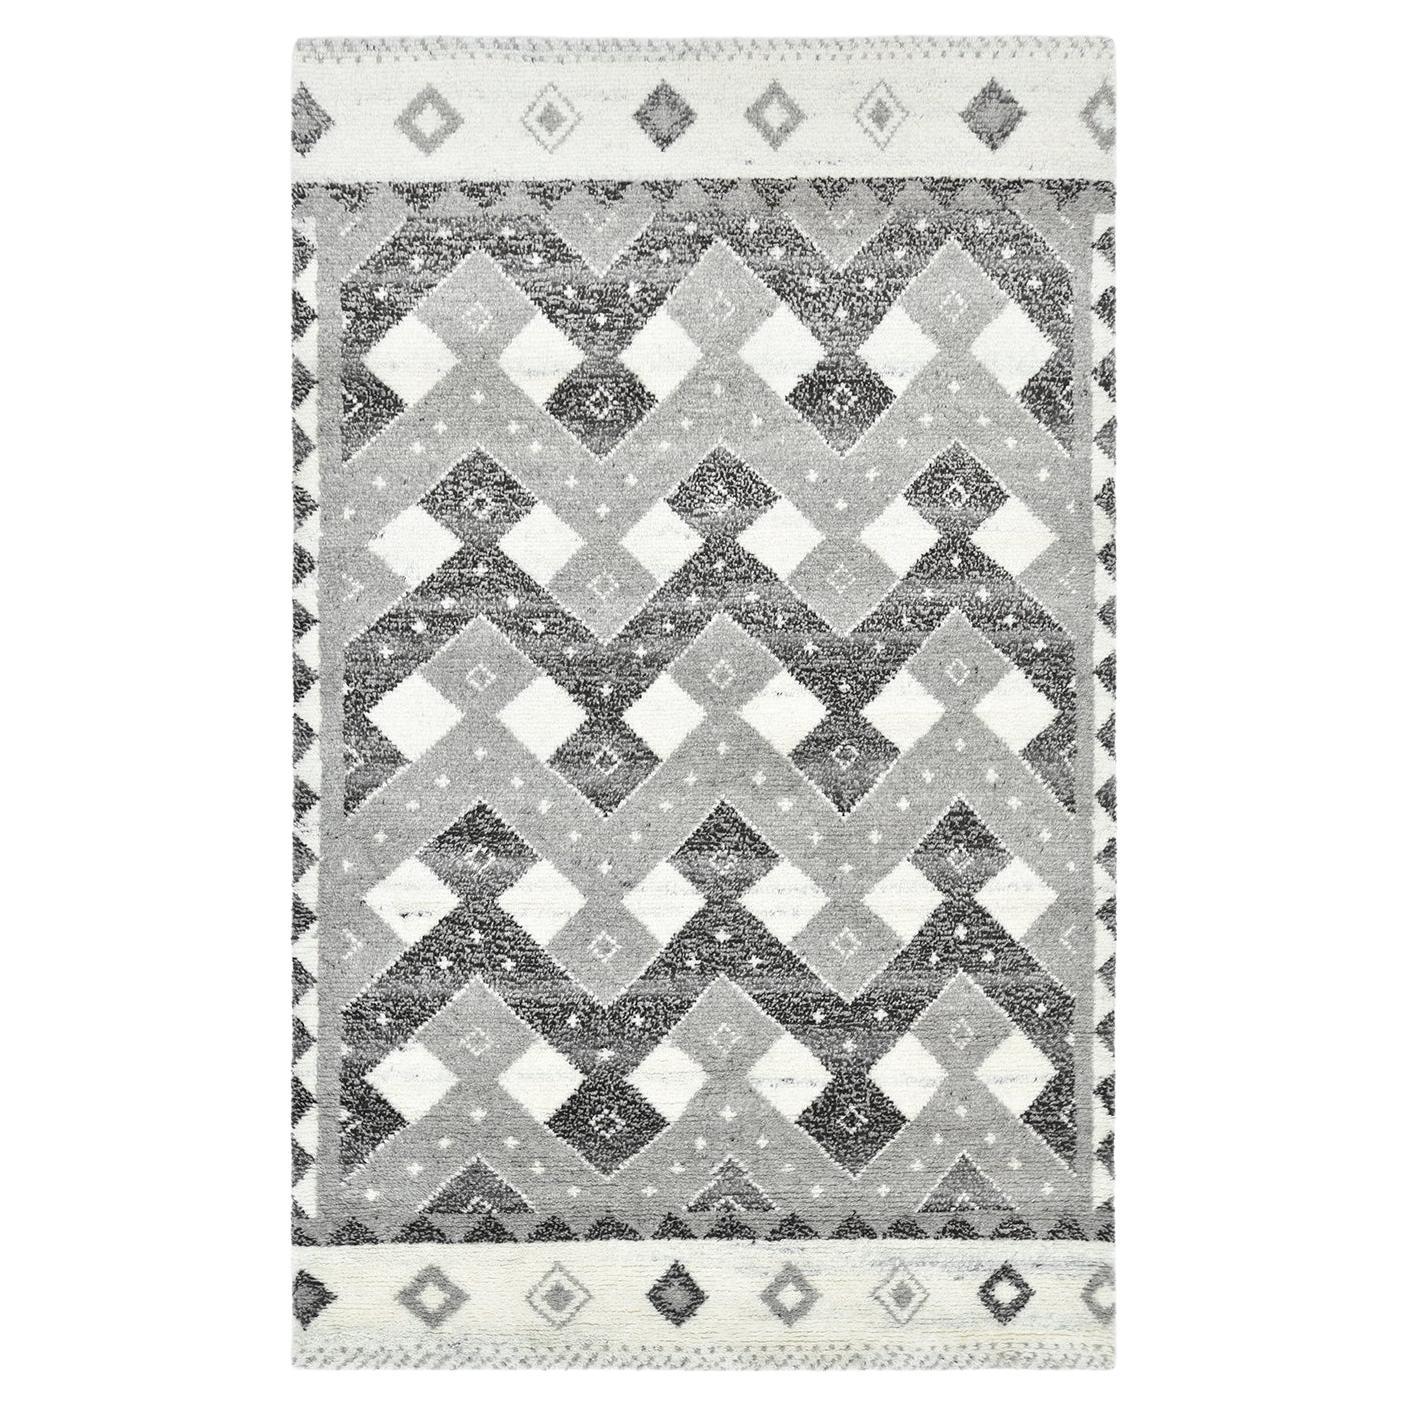 Solo Rugs Moroccan Chevron Hand-Knotted Gray Area Rug